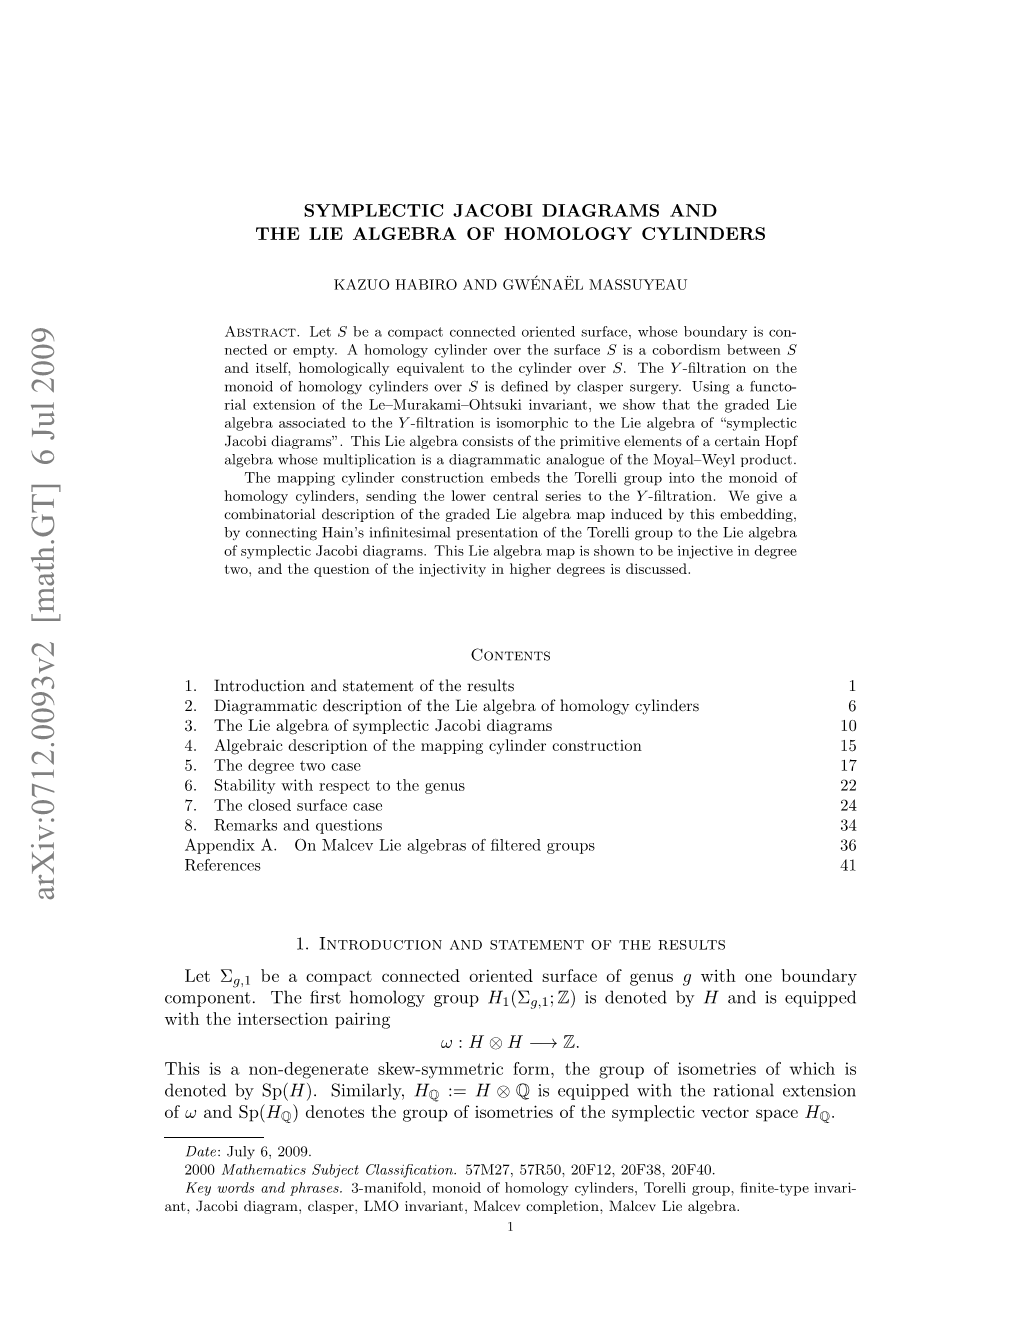 Symplectic Jacobi Diagrams and the Lie Algebra of Homology Cylinders